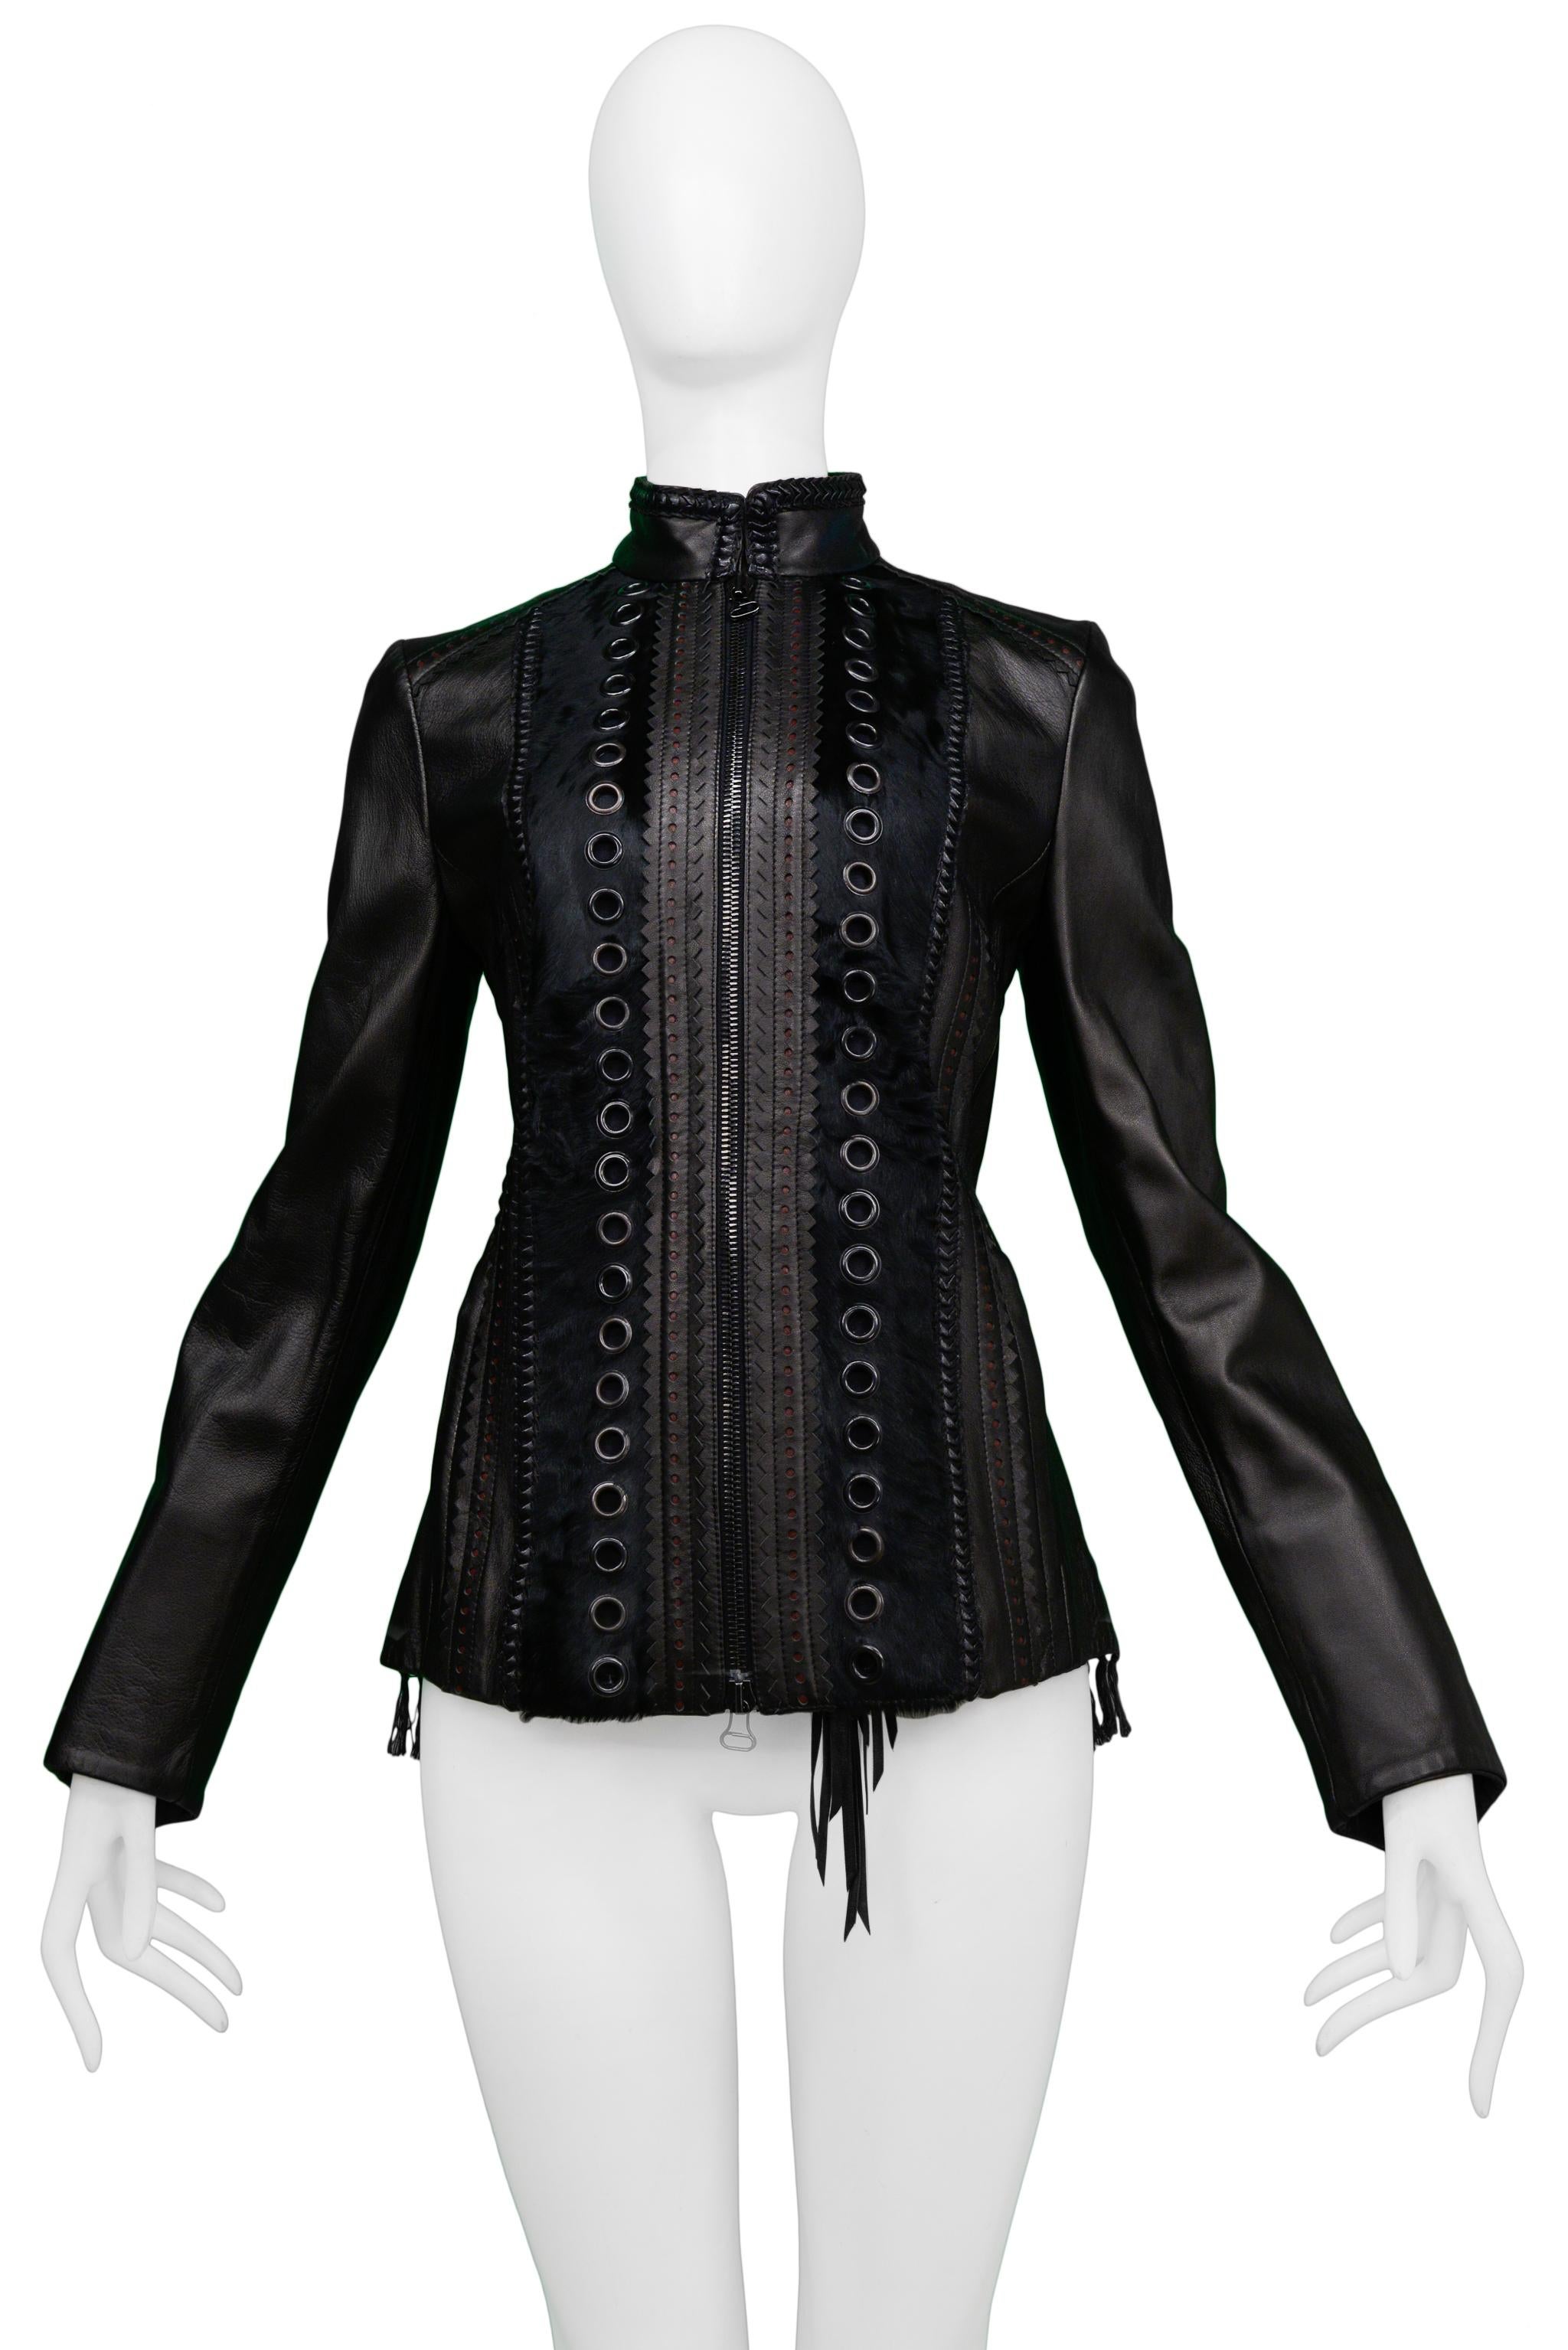 Resurrection Vintage is excited to offer a vintage Gianfranco Ferre black leather motorcycle jacket featuring a high collar, pony hair insets, whipstitching, decorative black leather trim, large gunmetal grommets, rows of small silver-tone grommets,